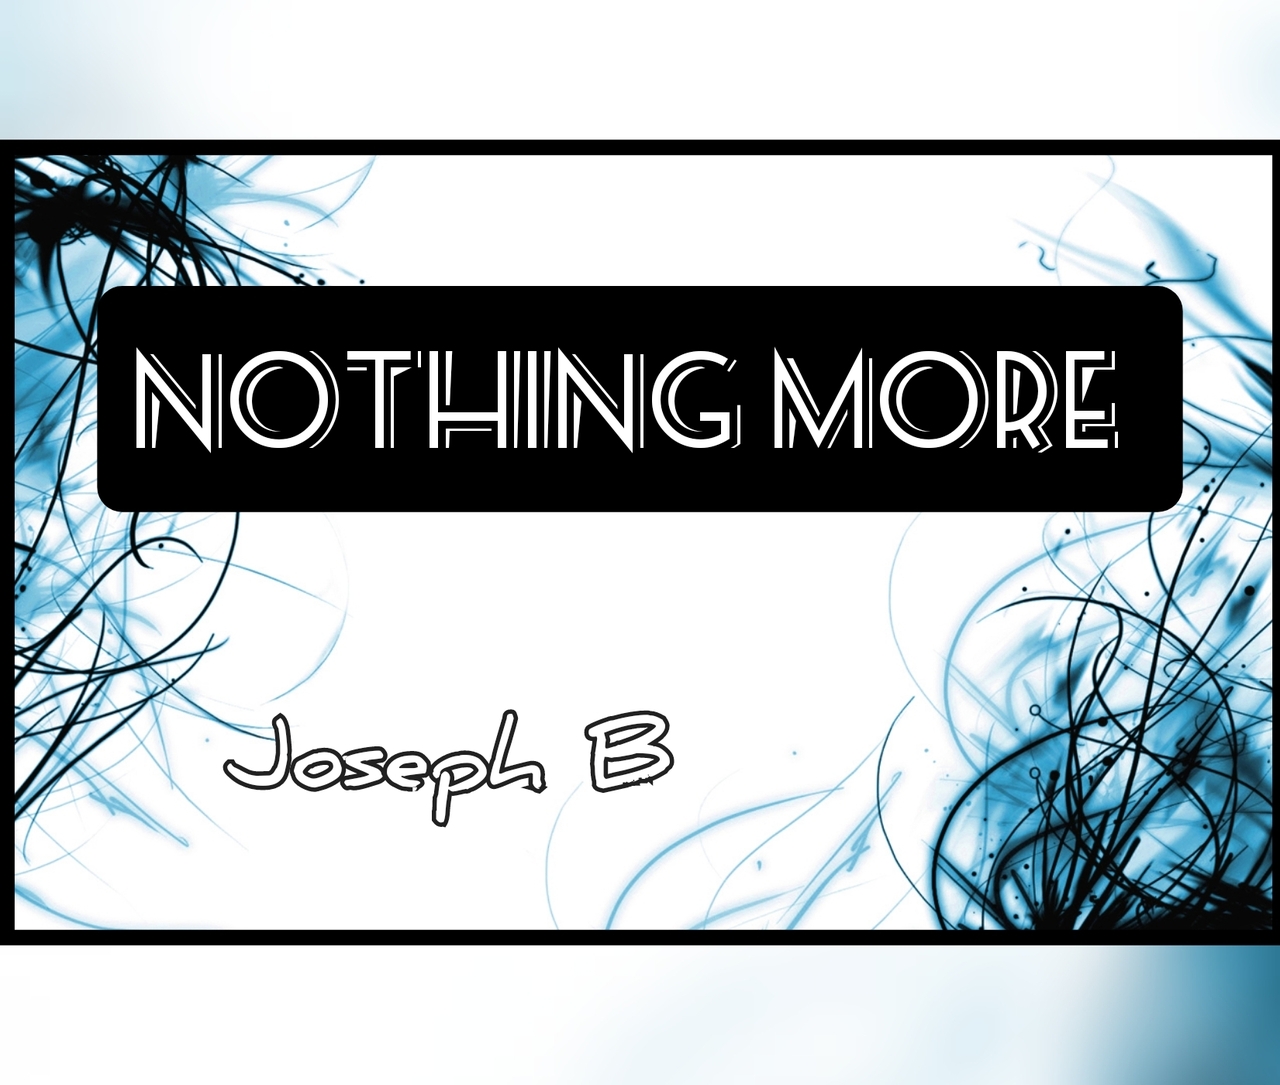 Nothing More by Joseph B. (Mp4 Video Download)